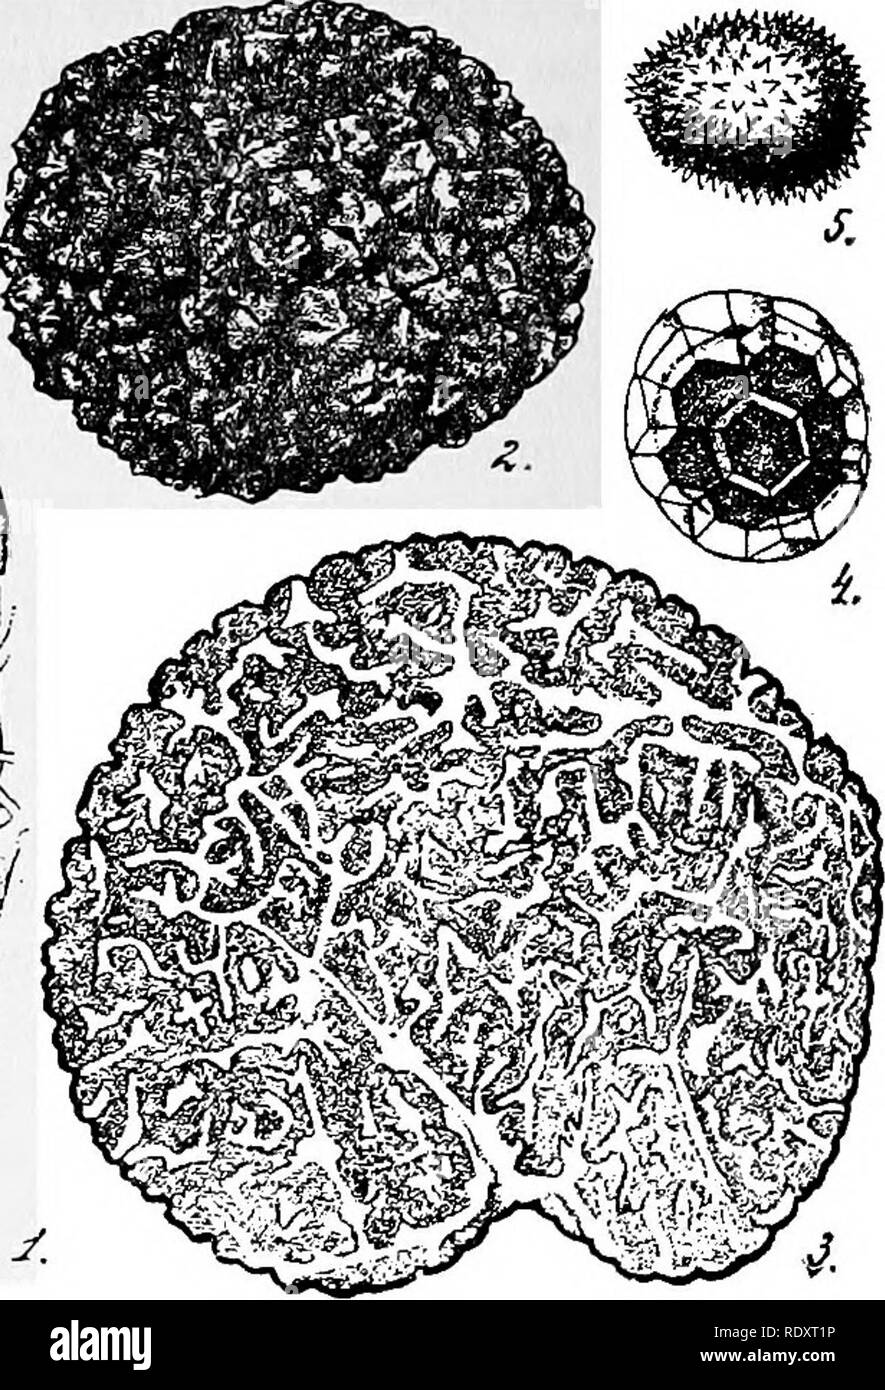 . A manual of poisonous plants, chiefly of eastern North America, with brief notes on economic and medicinal plants, and numerous illustrations. Poisonous plants. Fig. 81. Tuberaceae. Truffles. 1. Tuber ruhrum. Part of interior of a truffle, show- ing hyphae, asci, and ascospores, greatly magnified.^ 2. T. aestivum, fruiting body. 3. T. brumale, section of truffle. 4. Ascospore of T. Magnatum. 1, 3, 5, after Tulasne. 2 after Wettstein. ing to the lower surface. The spot contains a small pustule called the apothe- cium, which is cup-shaped. This cup-shaped body contains the asci (sacs) in which Stock Photo